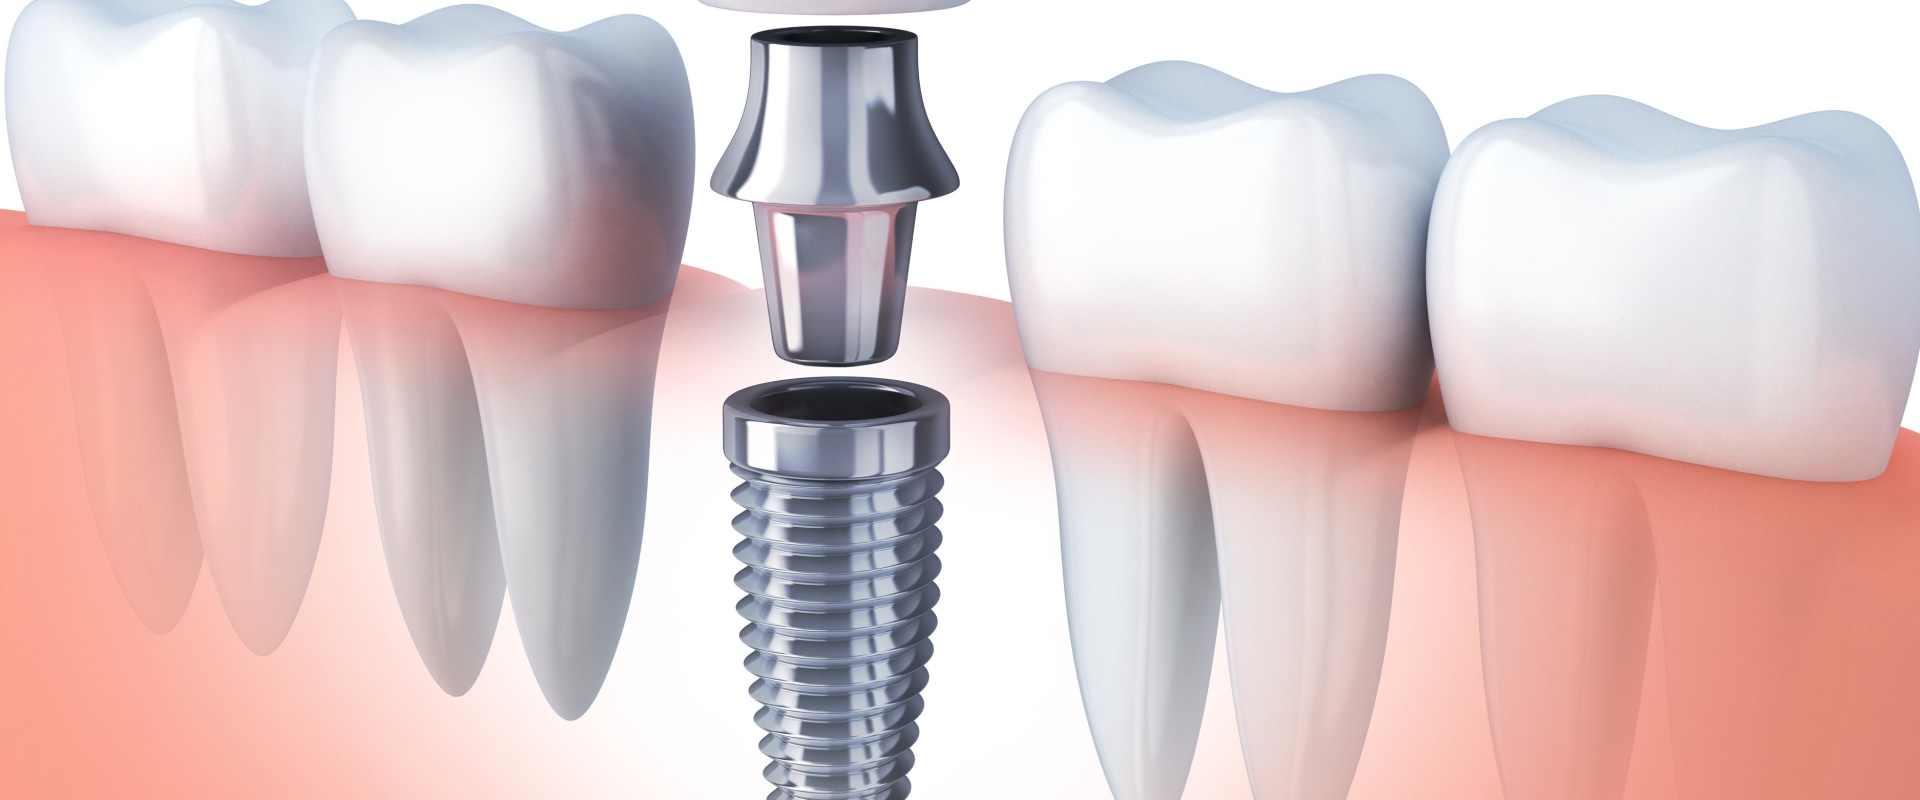 How much pain for dental implants?